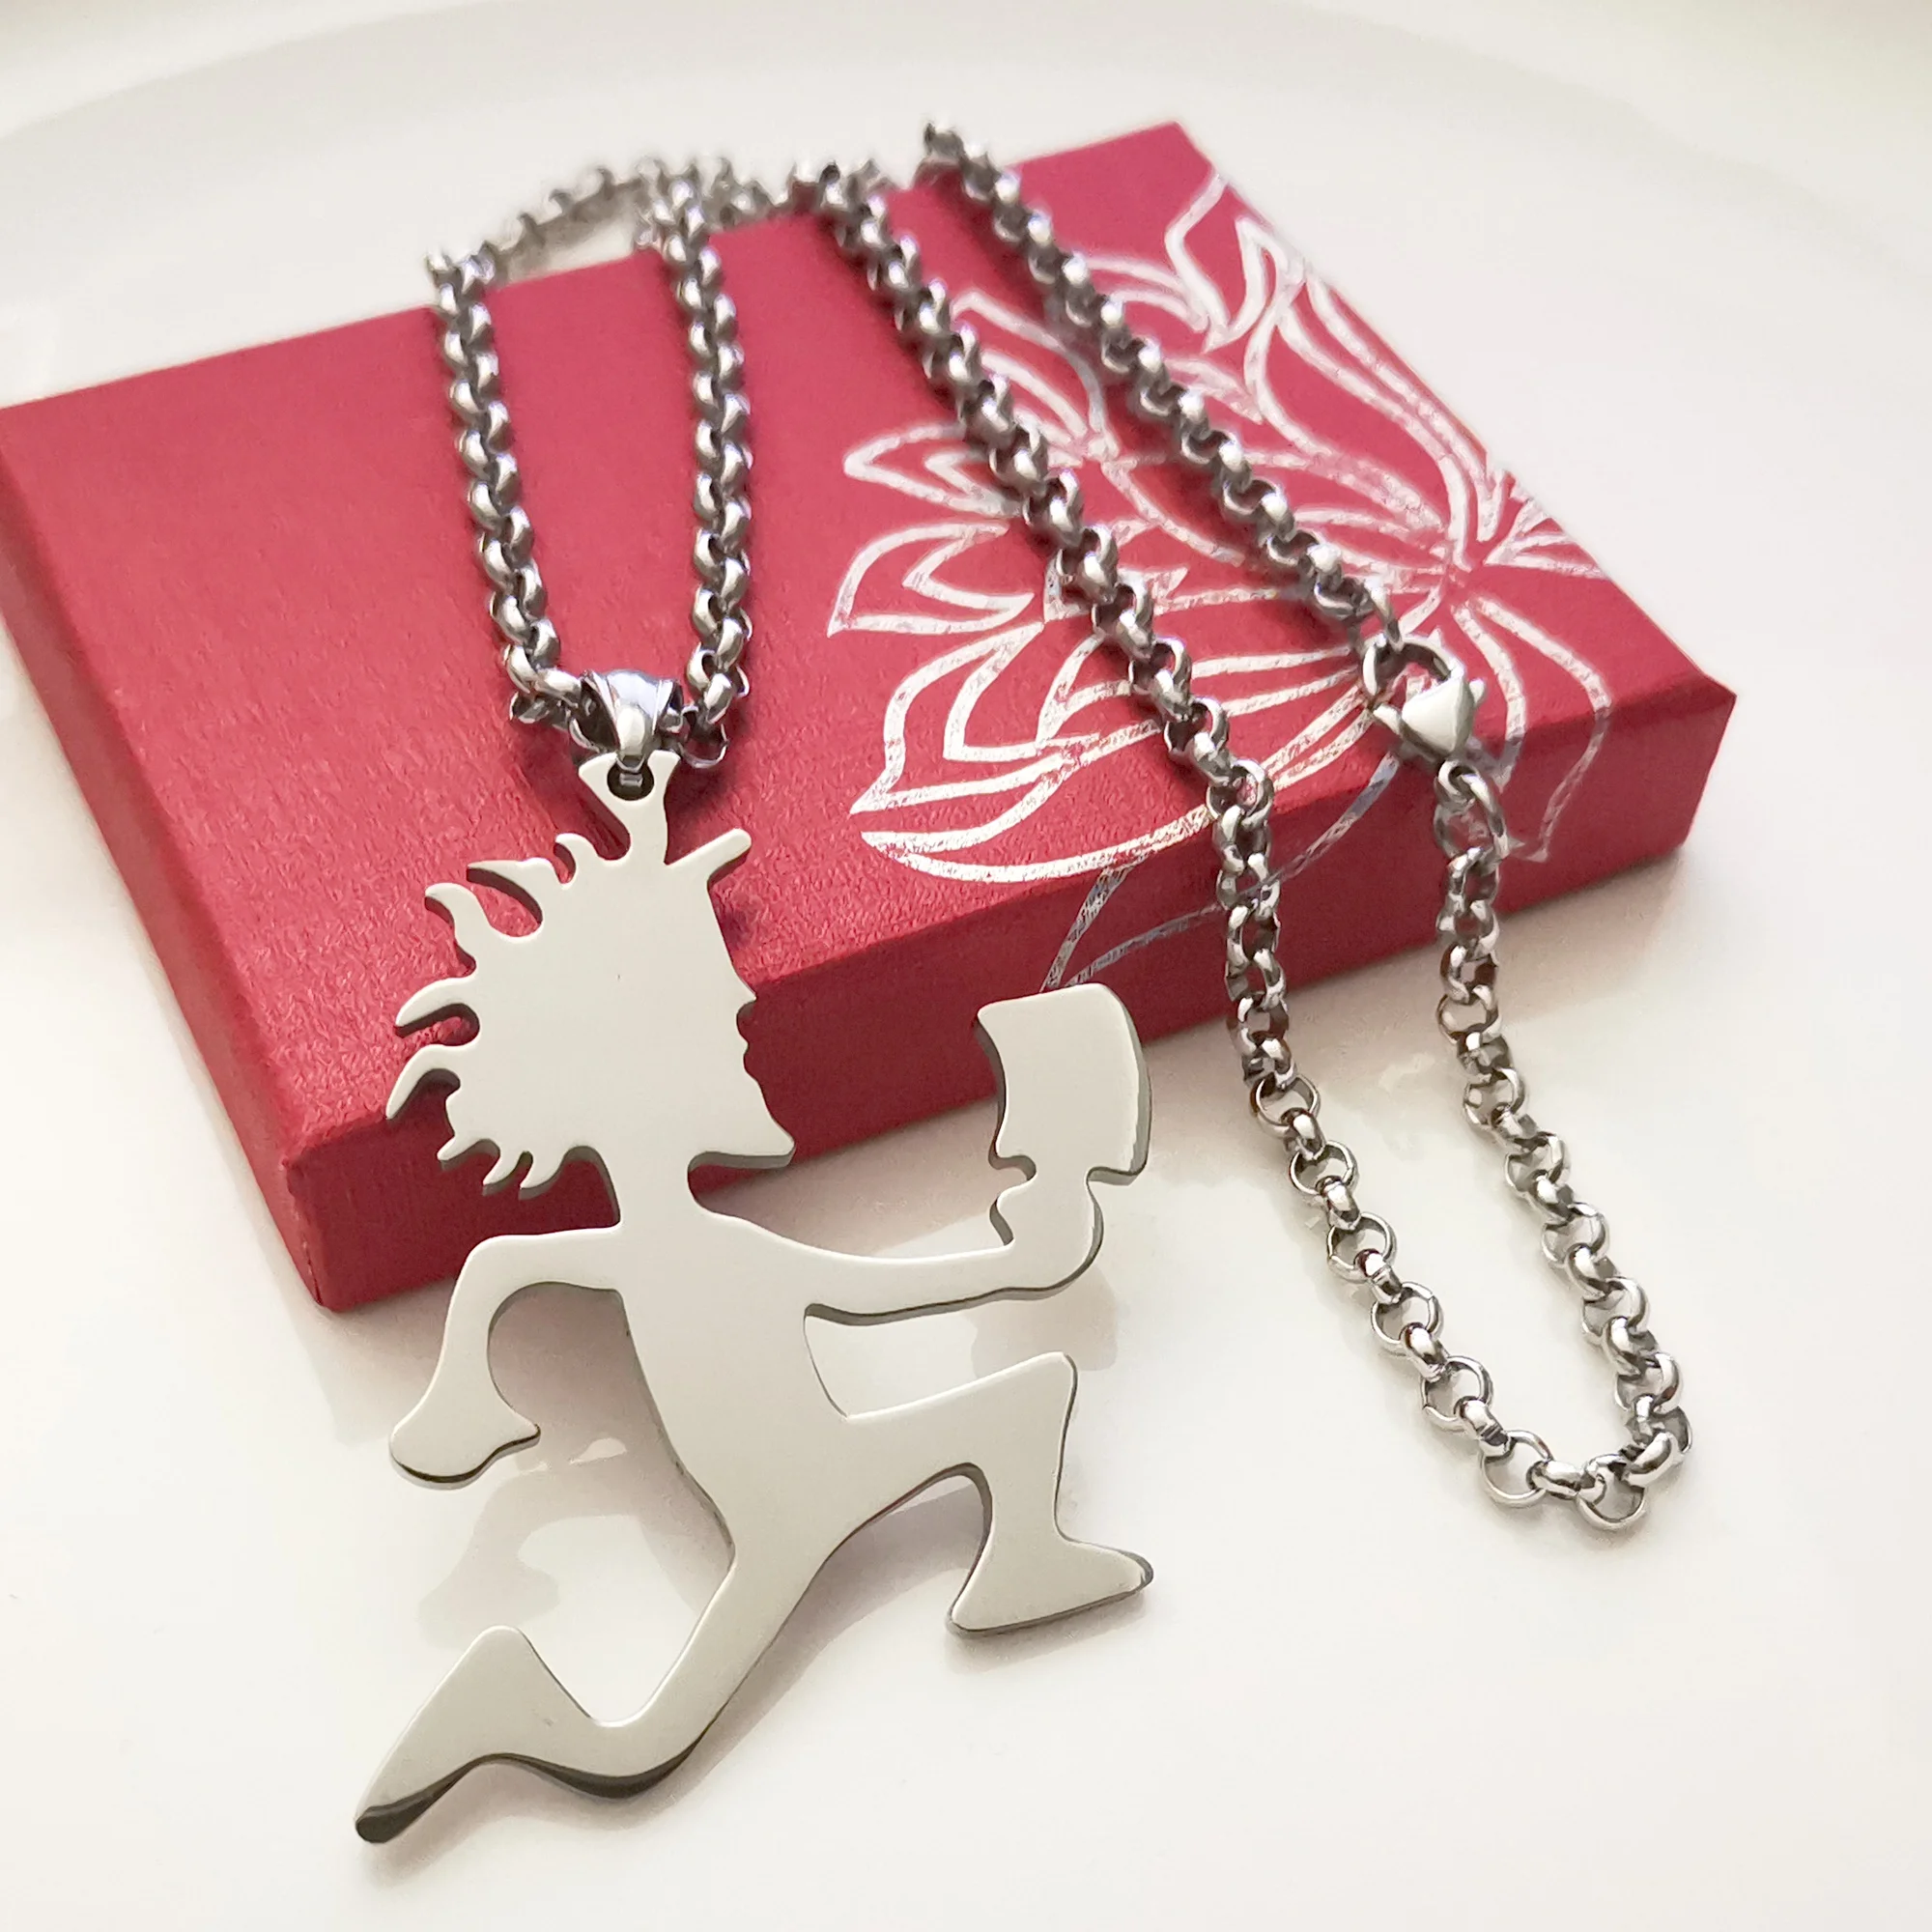 U/K ICP Insane Clown Posse COC stainless steel charms Twiztid Fashion  Juggalo ABK CURB CHAIN NECKLACE PENDANT 5MM 24 INCH, Metal, not known :  Amazon.ca: Clothing, Shoes & Accessories